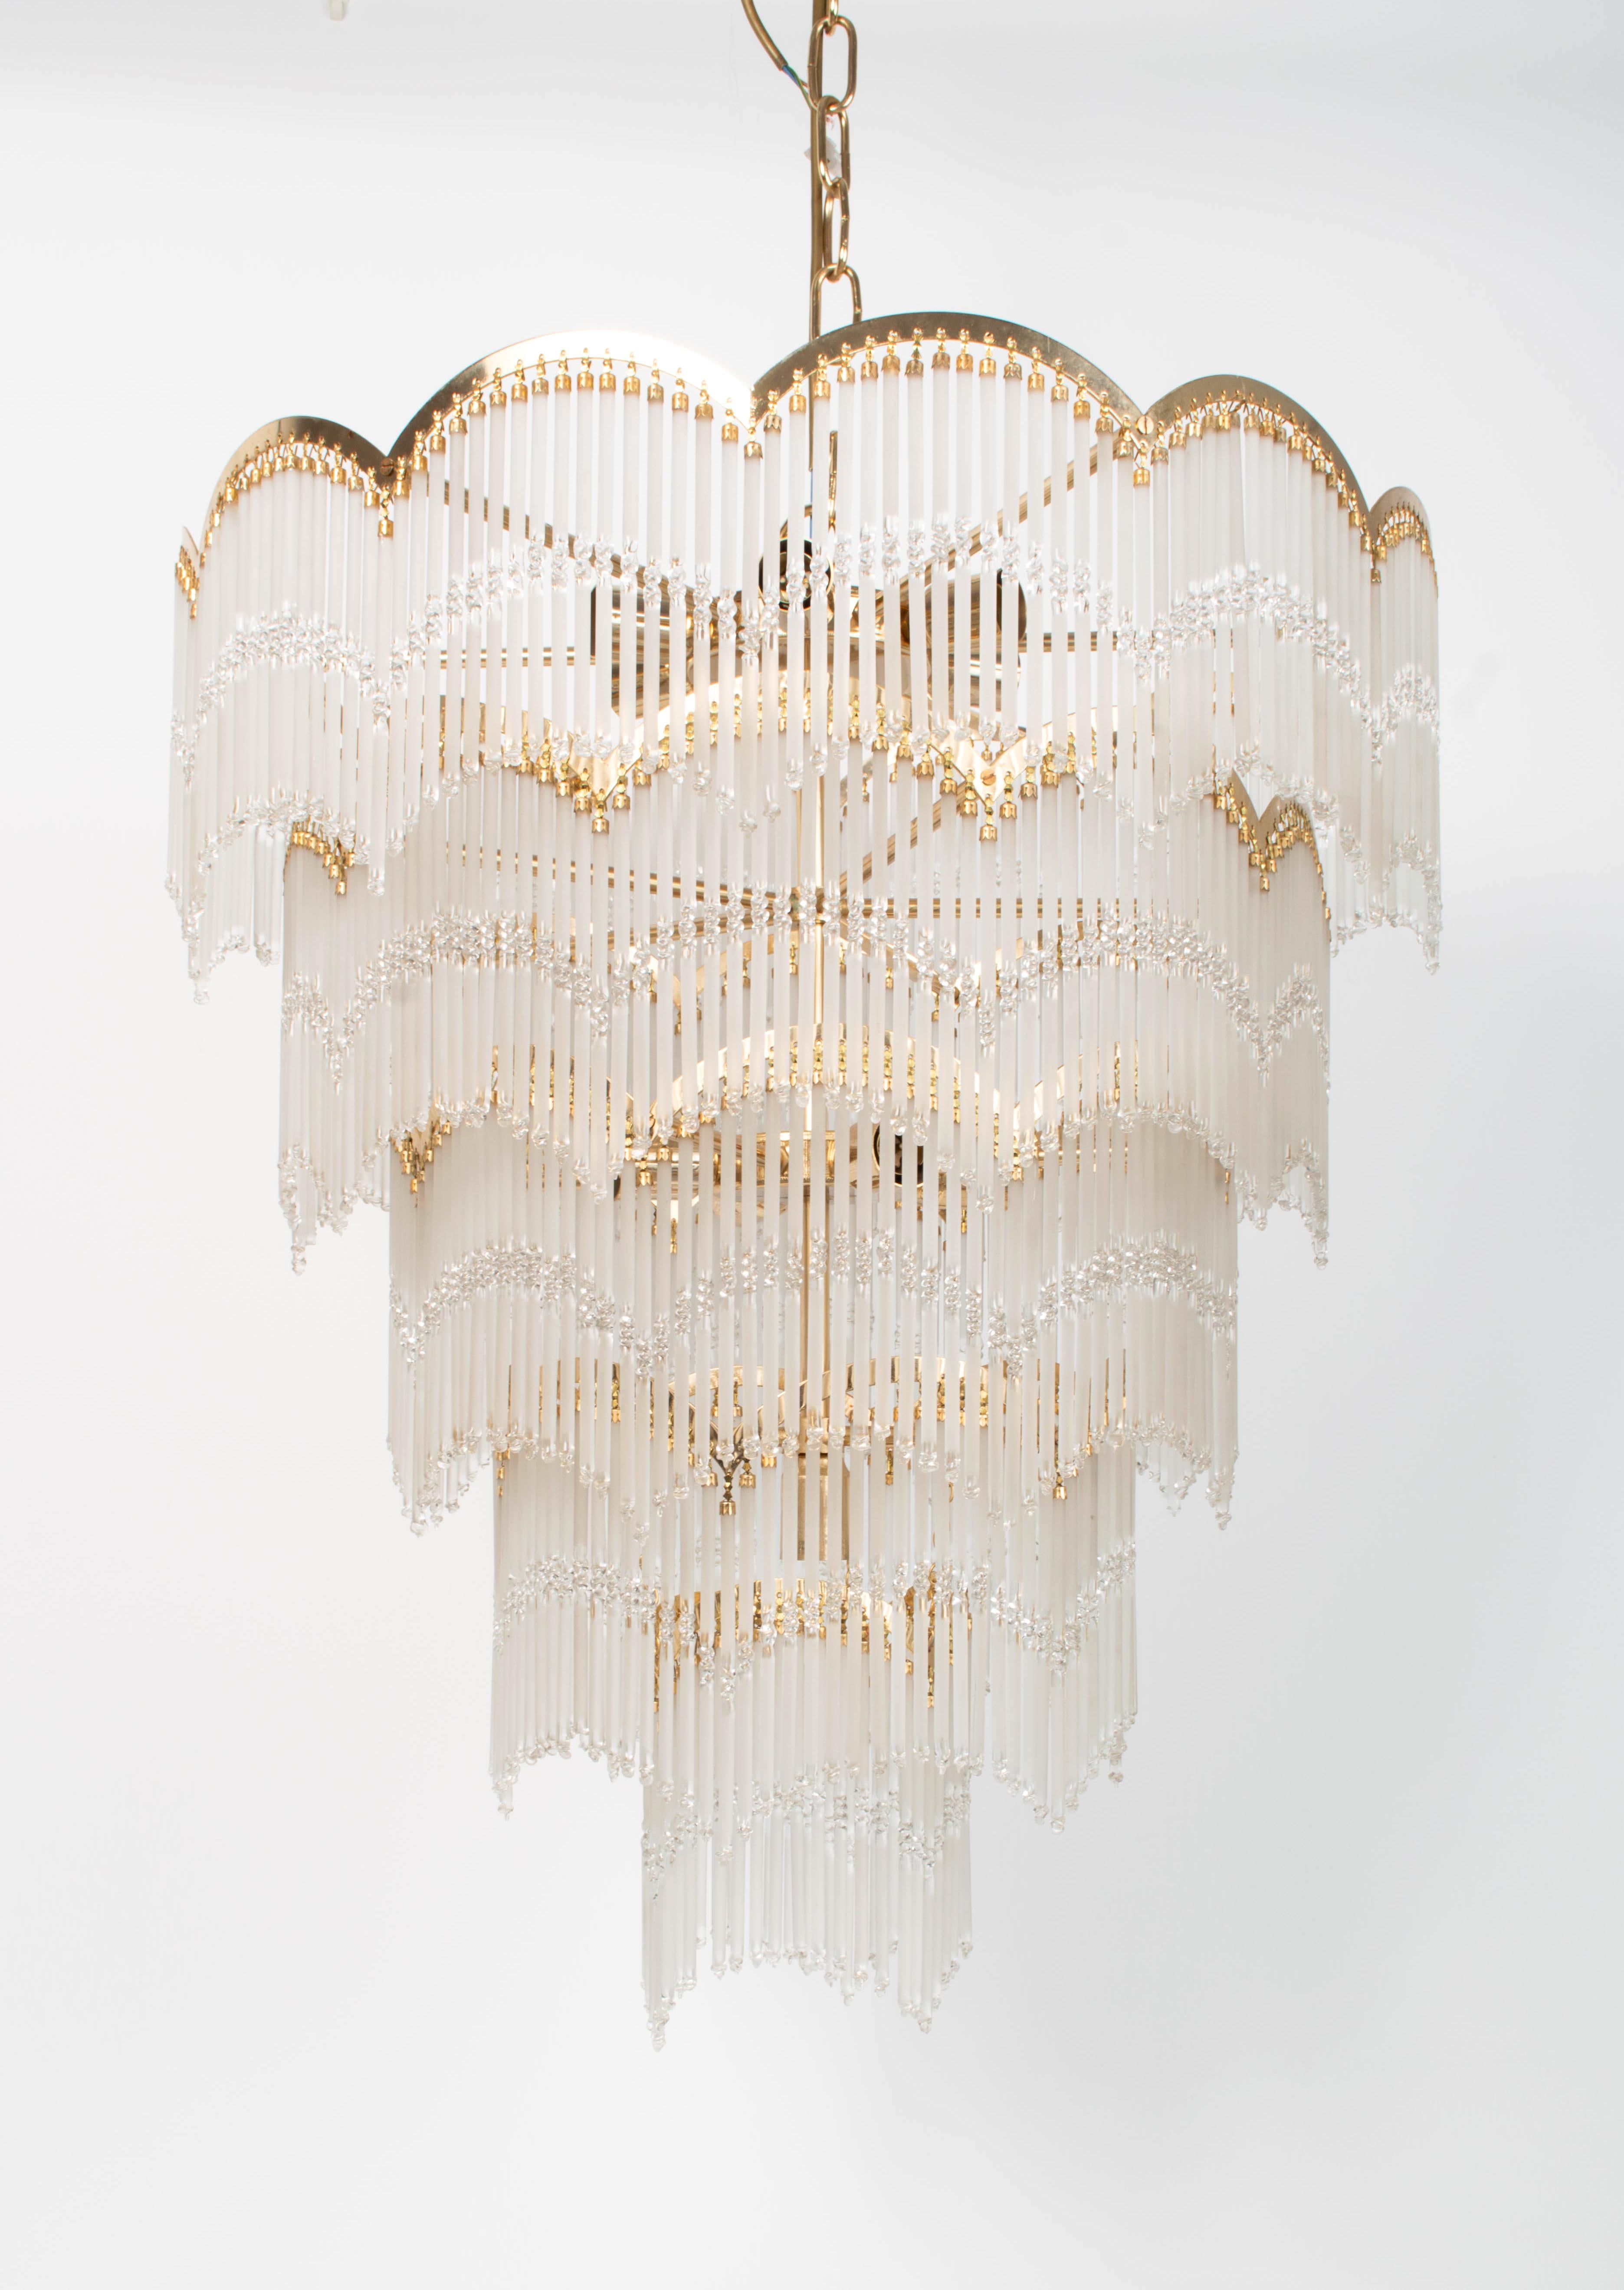 Large Five Tier Frosted Glass Waterfall Chandelier England, C.1970 For Sale 4